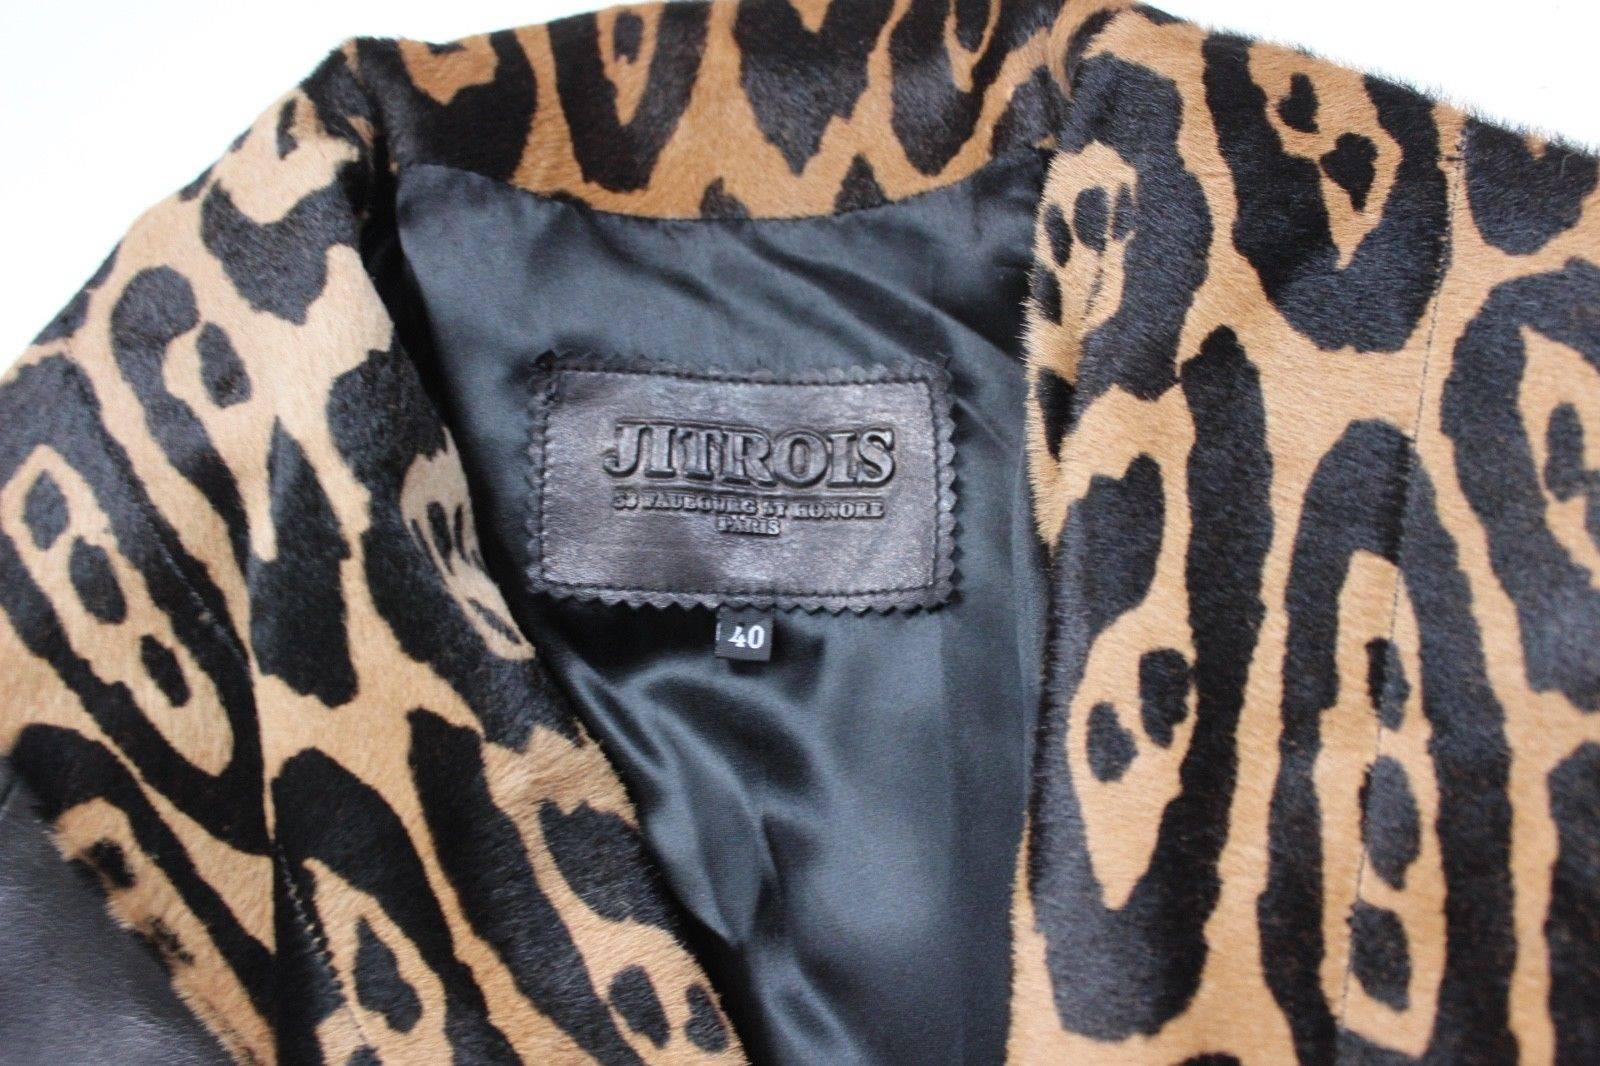 Jitrois Black Leather Leopard Fur Trim Jacket 40 uk 12 Black leather jacket with In Excellent Condition For Sale In London, GB